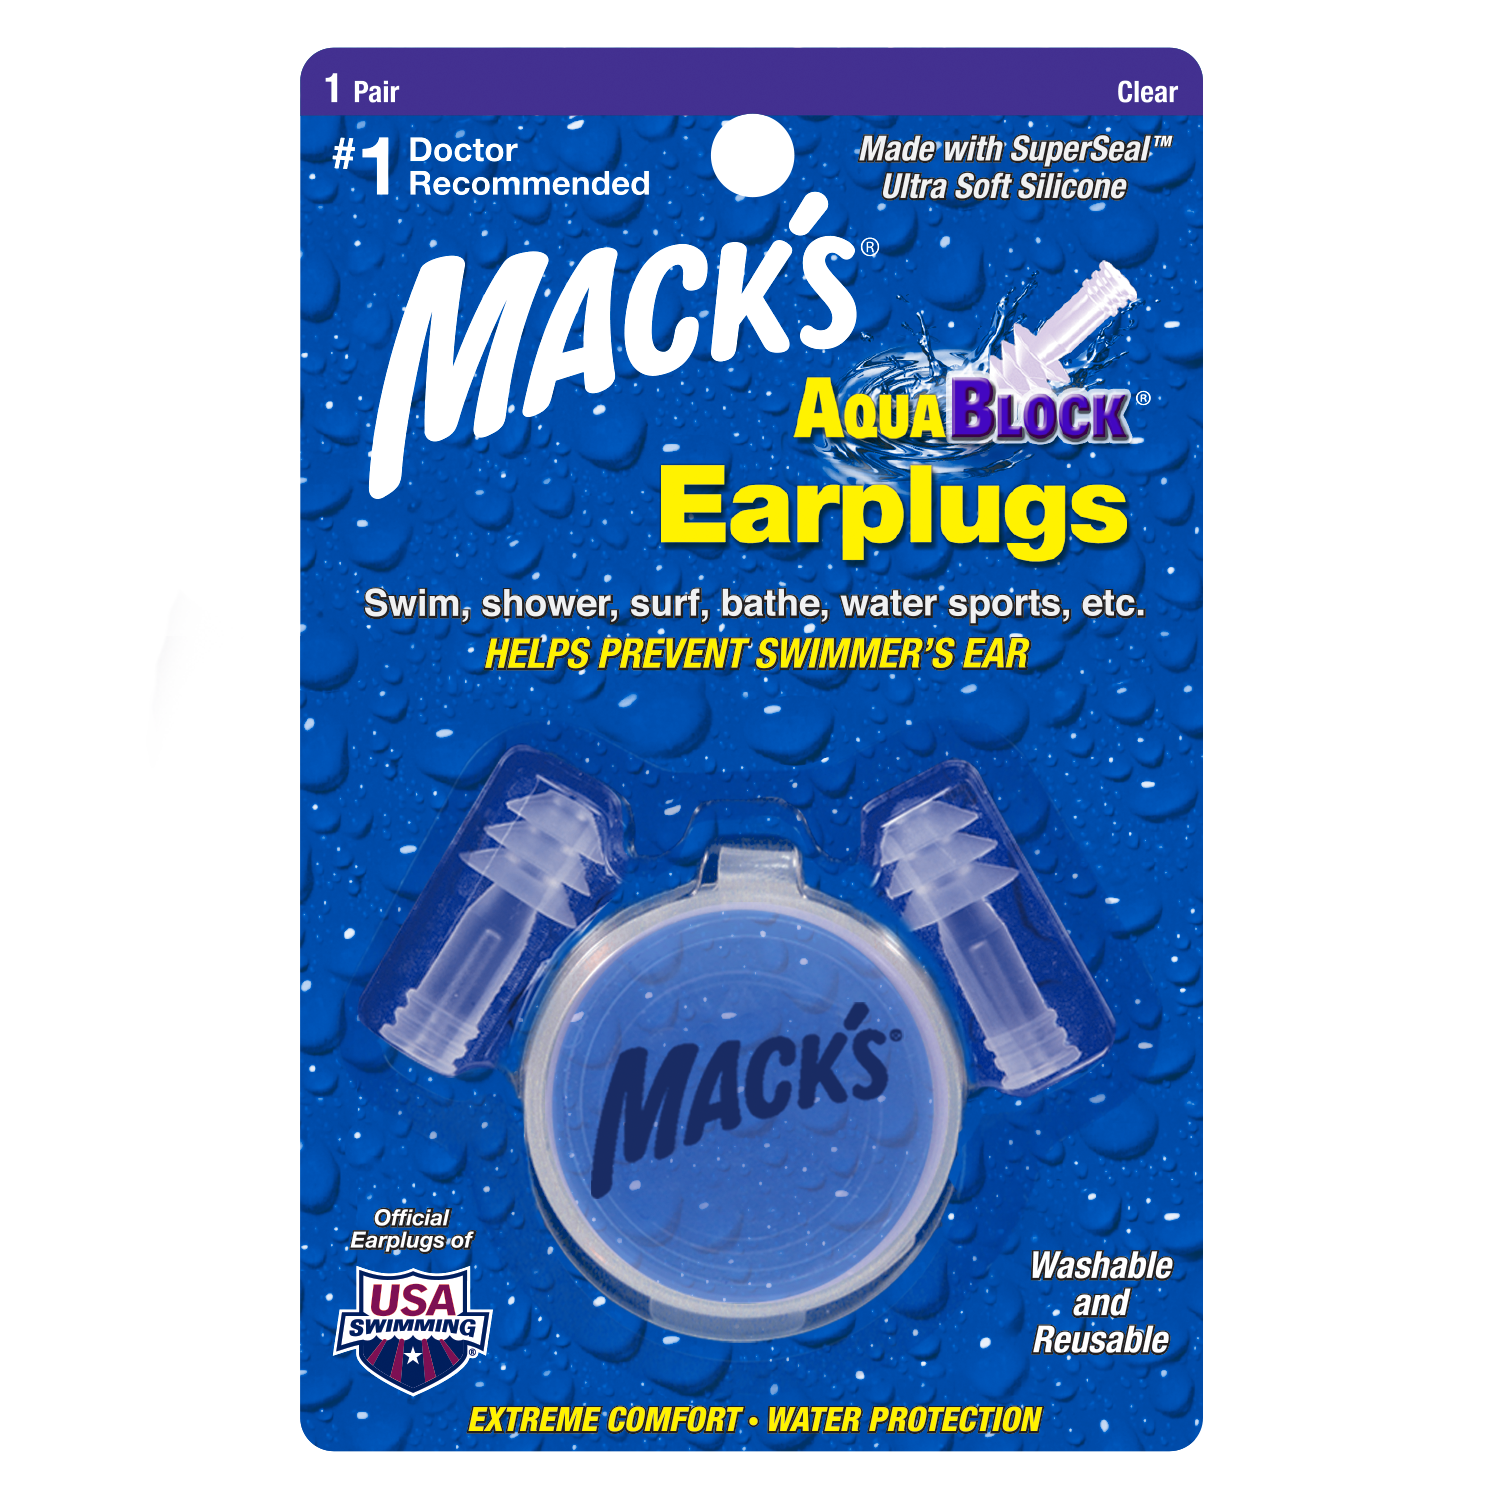 Mack's AquaBlock Swimming Earplugs - Comfortable, Waterproof, Reusable Silicone Ear Plugs for Swimming, Snorkeling, Showering, Surfing, Bathing, and Water Sports - #1 Doctor Recommended